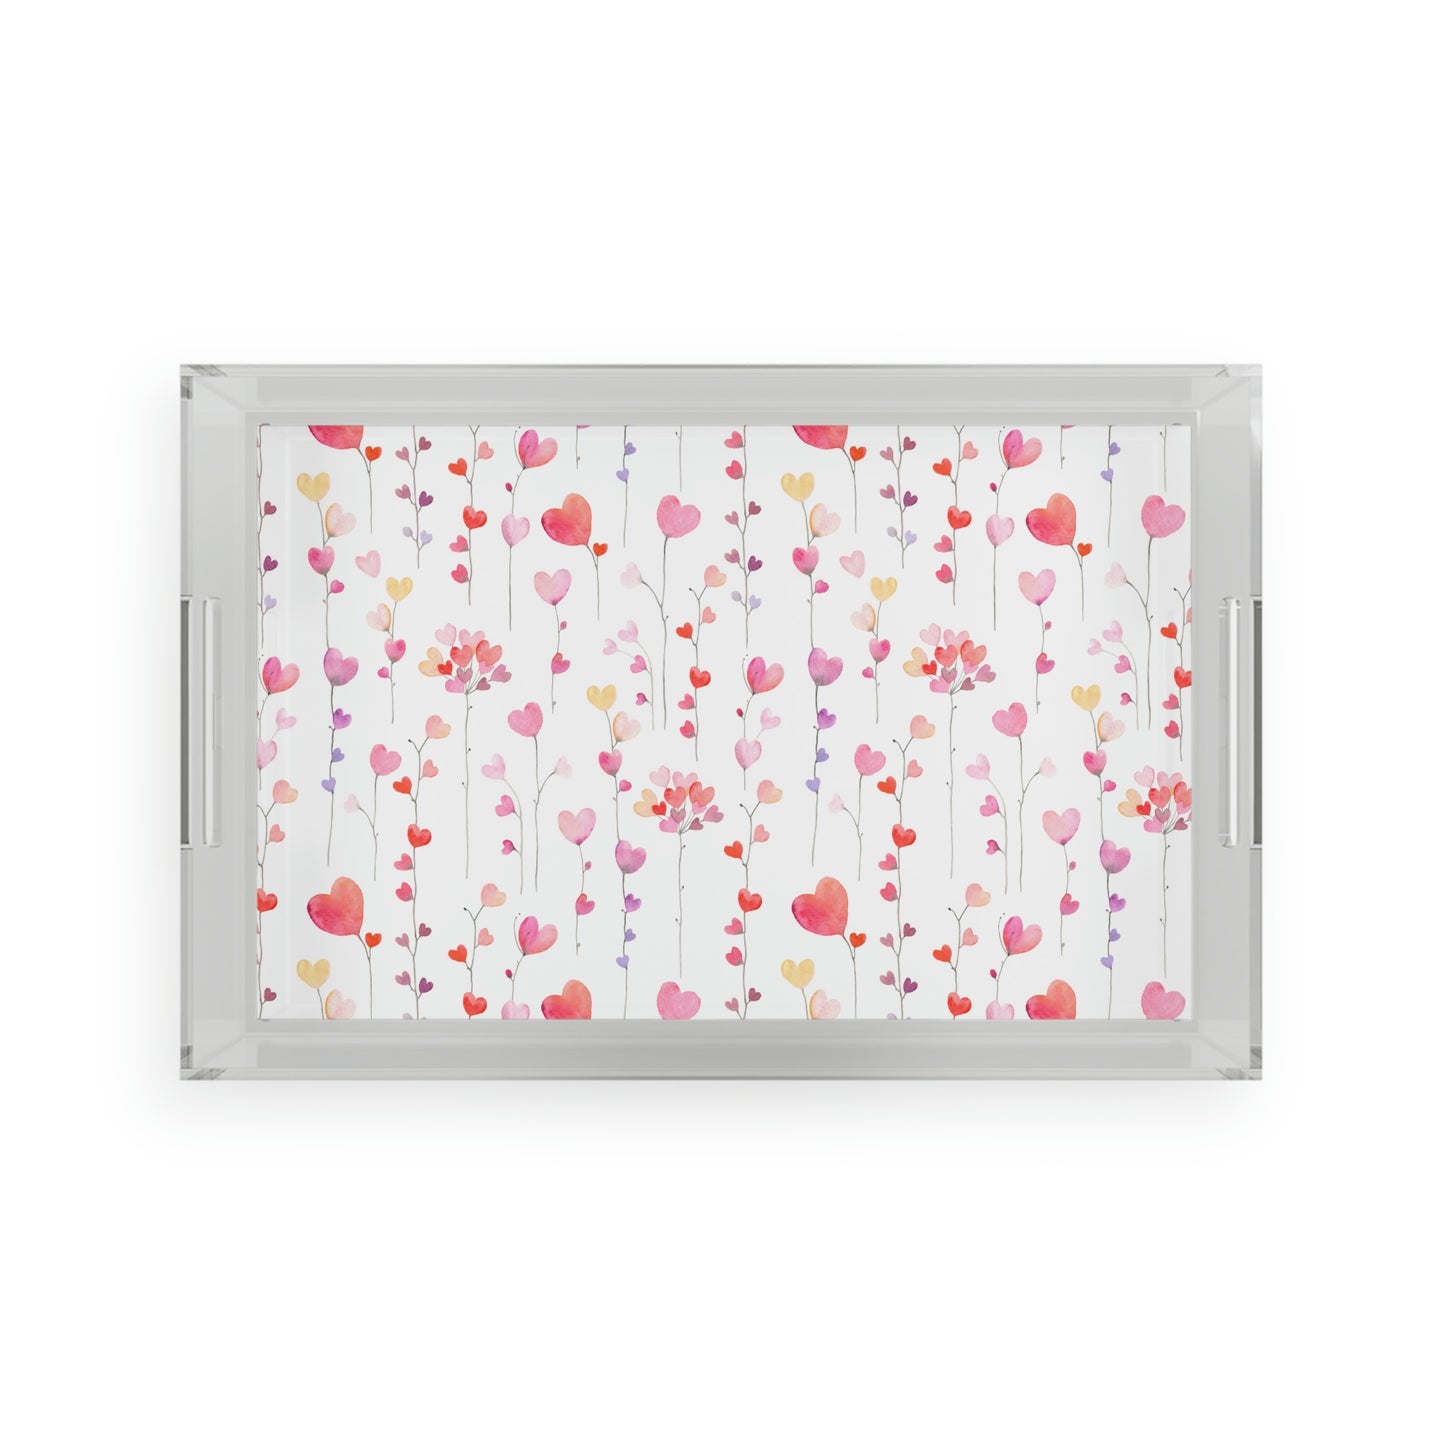 Heart Flowers Acrylic Serving Tray